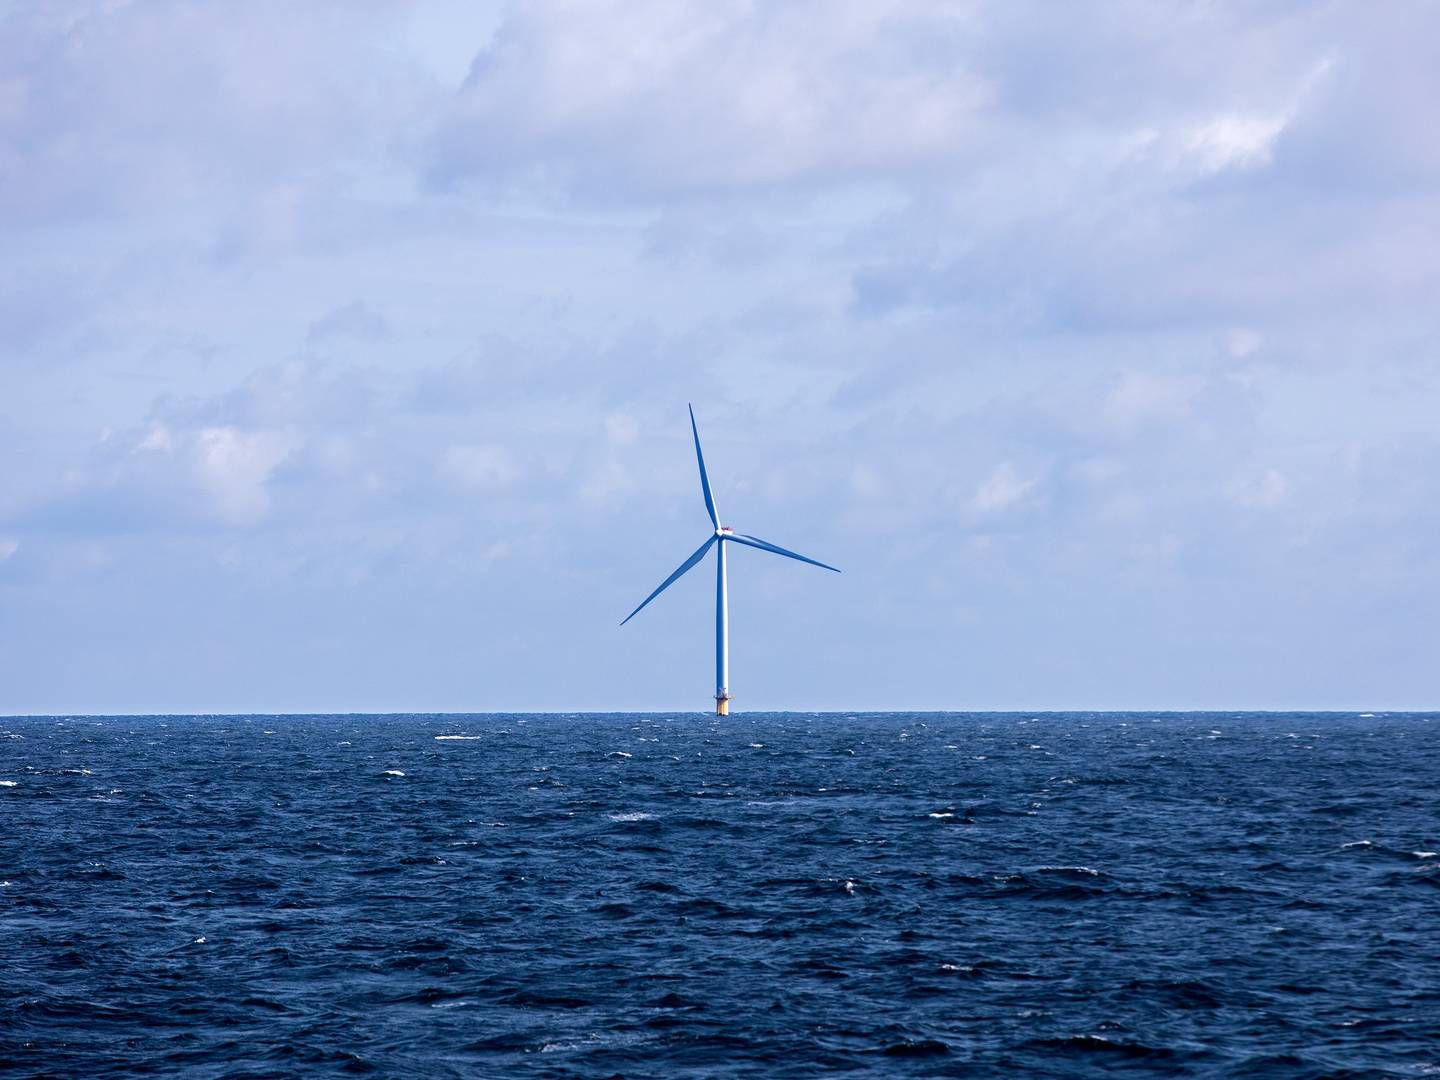 GE, which was awarded USD 300m in funding for new production as part of the bidding process, has chosen not to move forward with the larger platform, instead sticking with its existing facilities for 15.5-16.5MW turbines. | Photo: Finn Frandsen